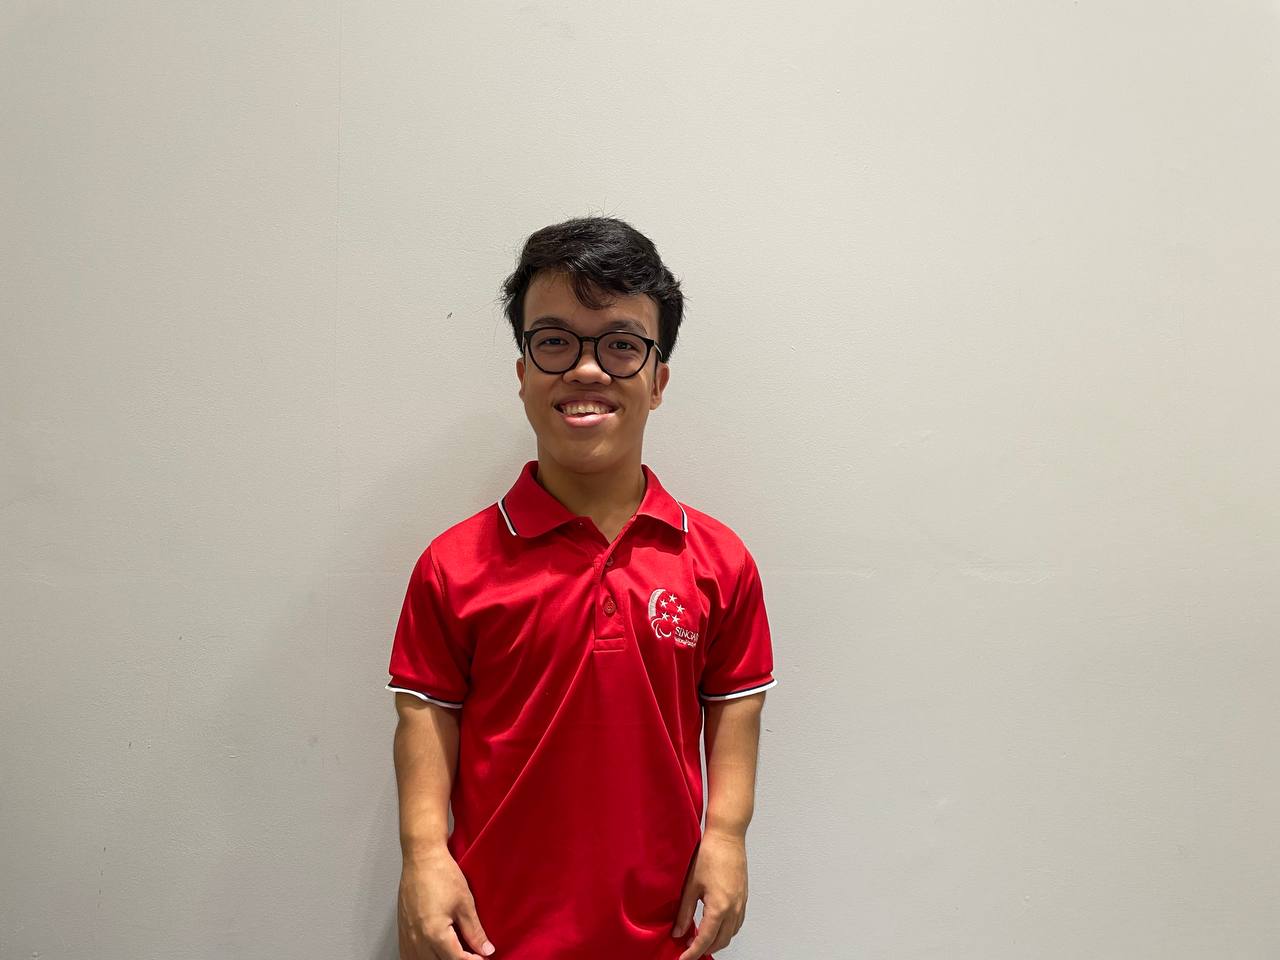 Lim smiles for the camera, dressed in a red polo t-shirt and standing in front of a white background.